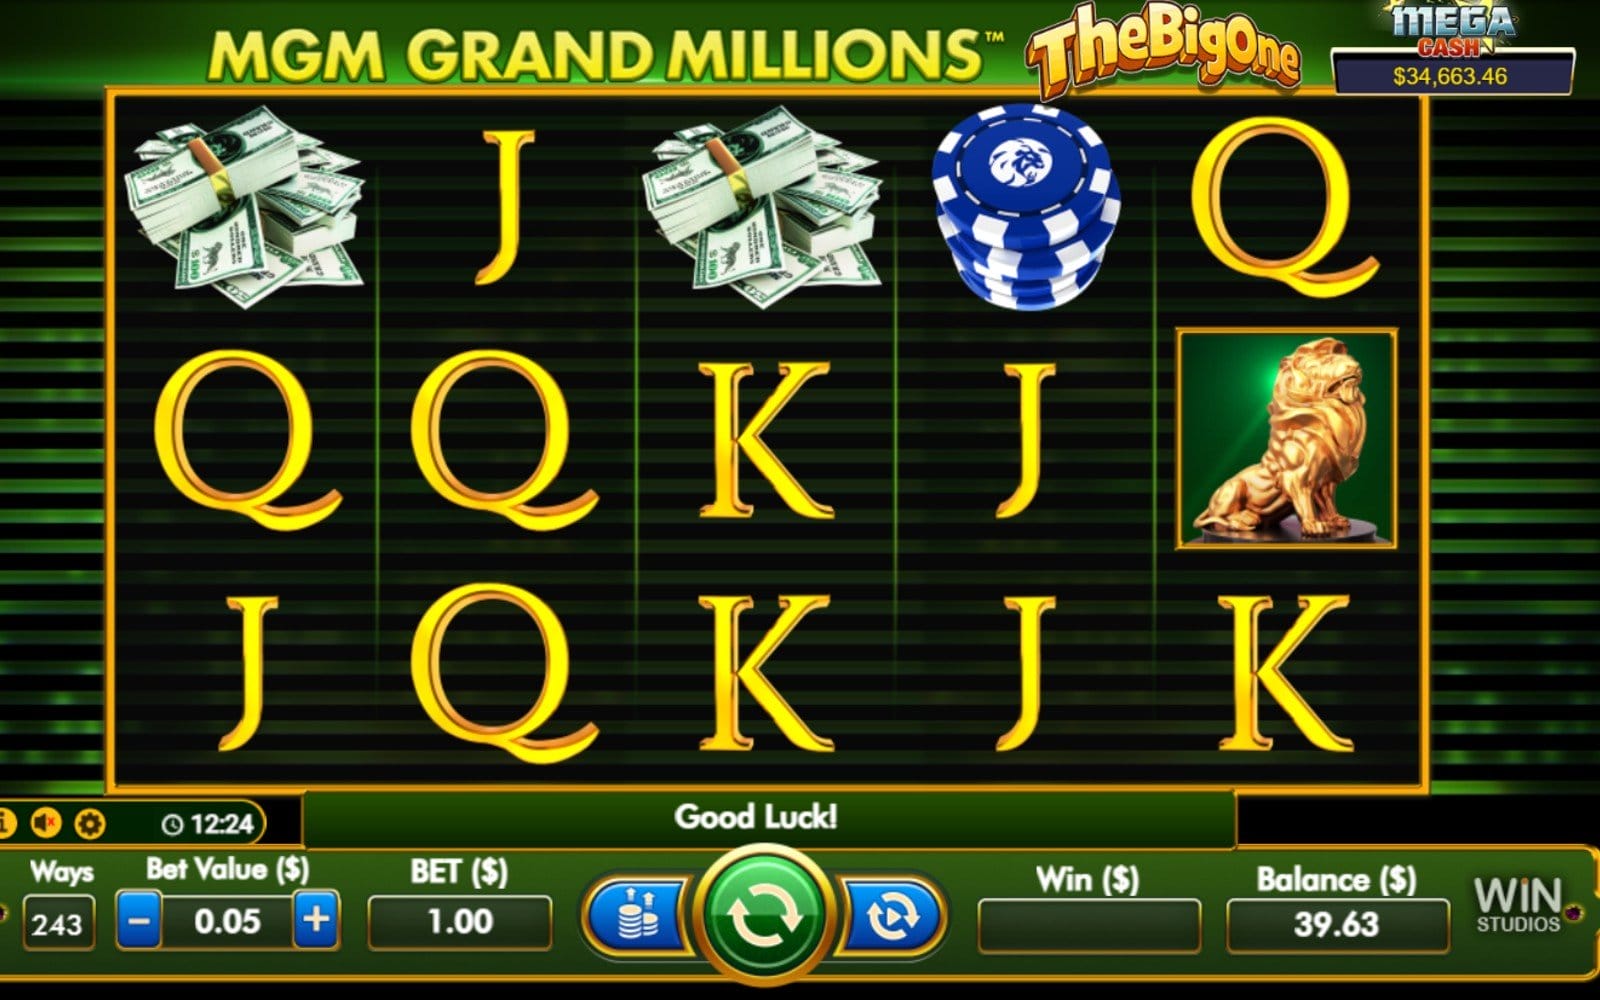 download the new for windows Play MGM Casino